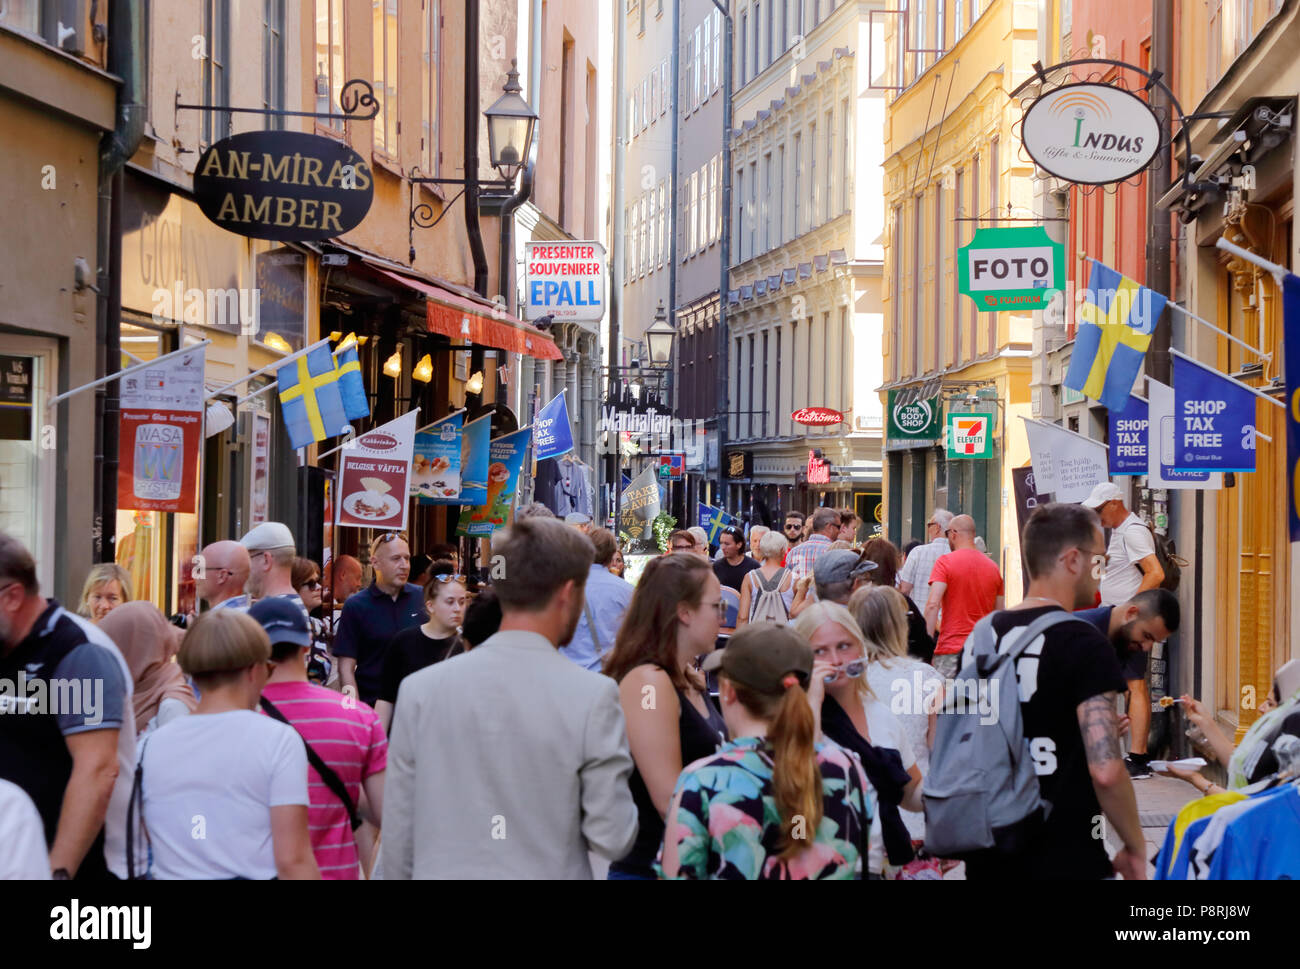 Stockholm, Sweden - July 12, 2018: The Vasterlanggatan street in the Old town district crowded, which is a popular place for tourists to visit. Stock Photo